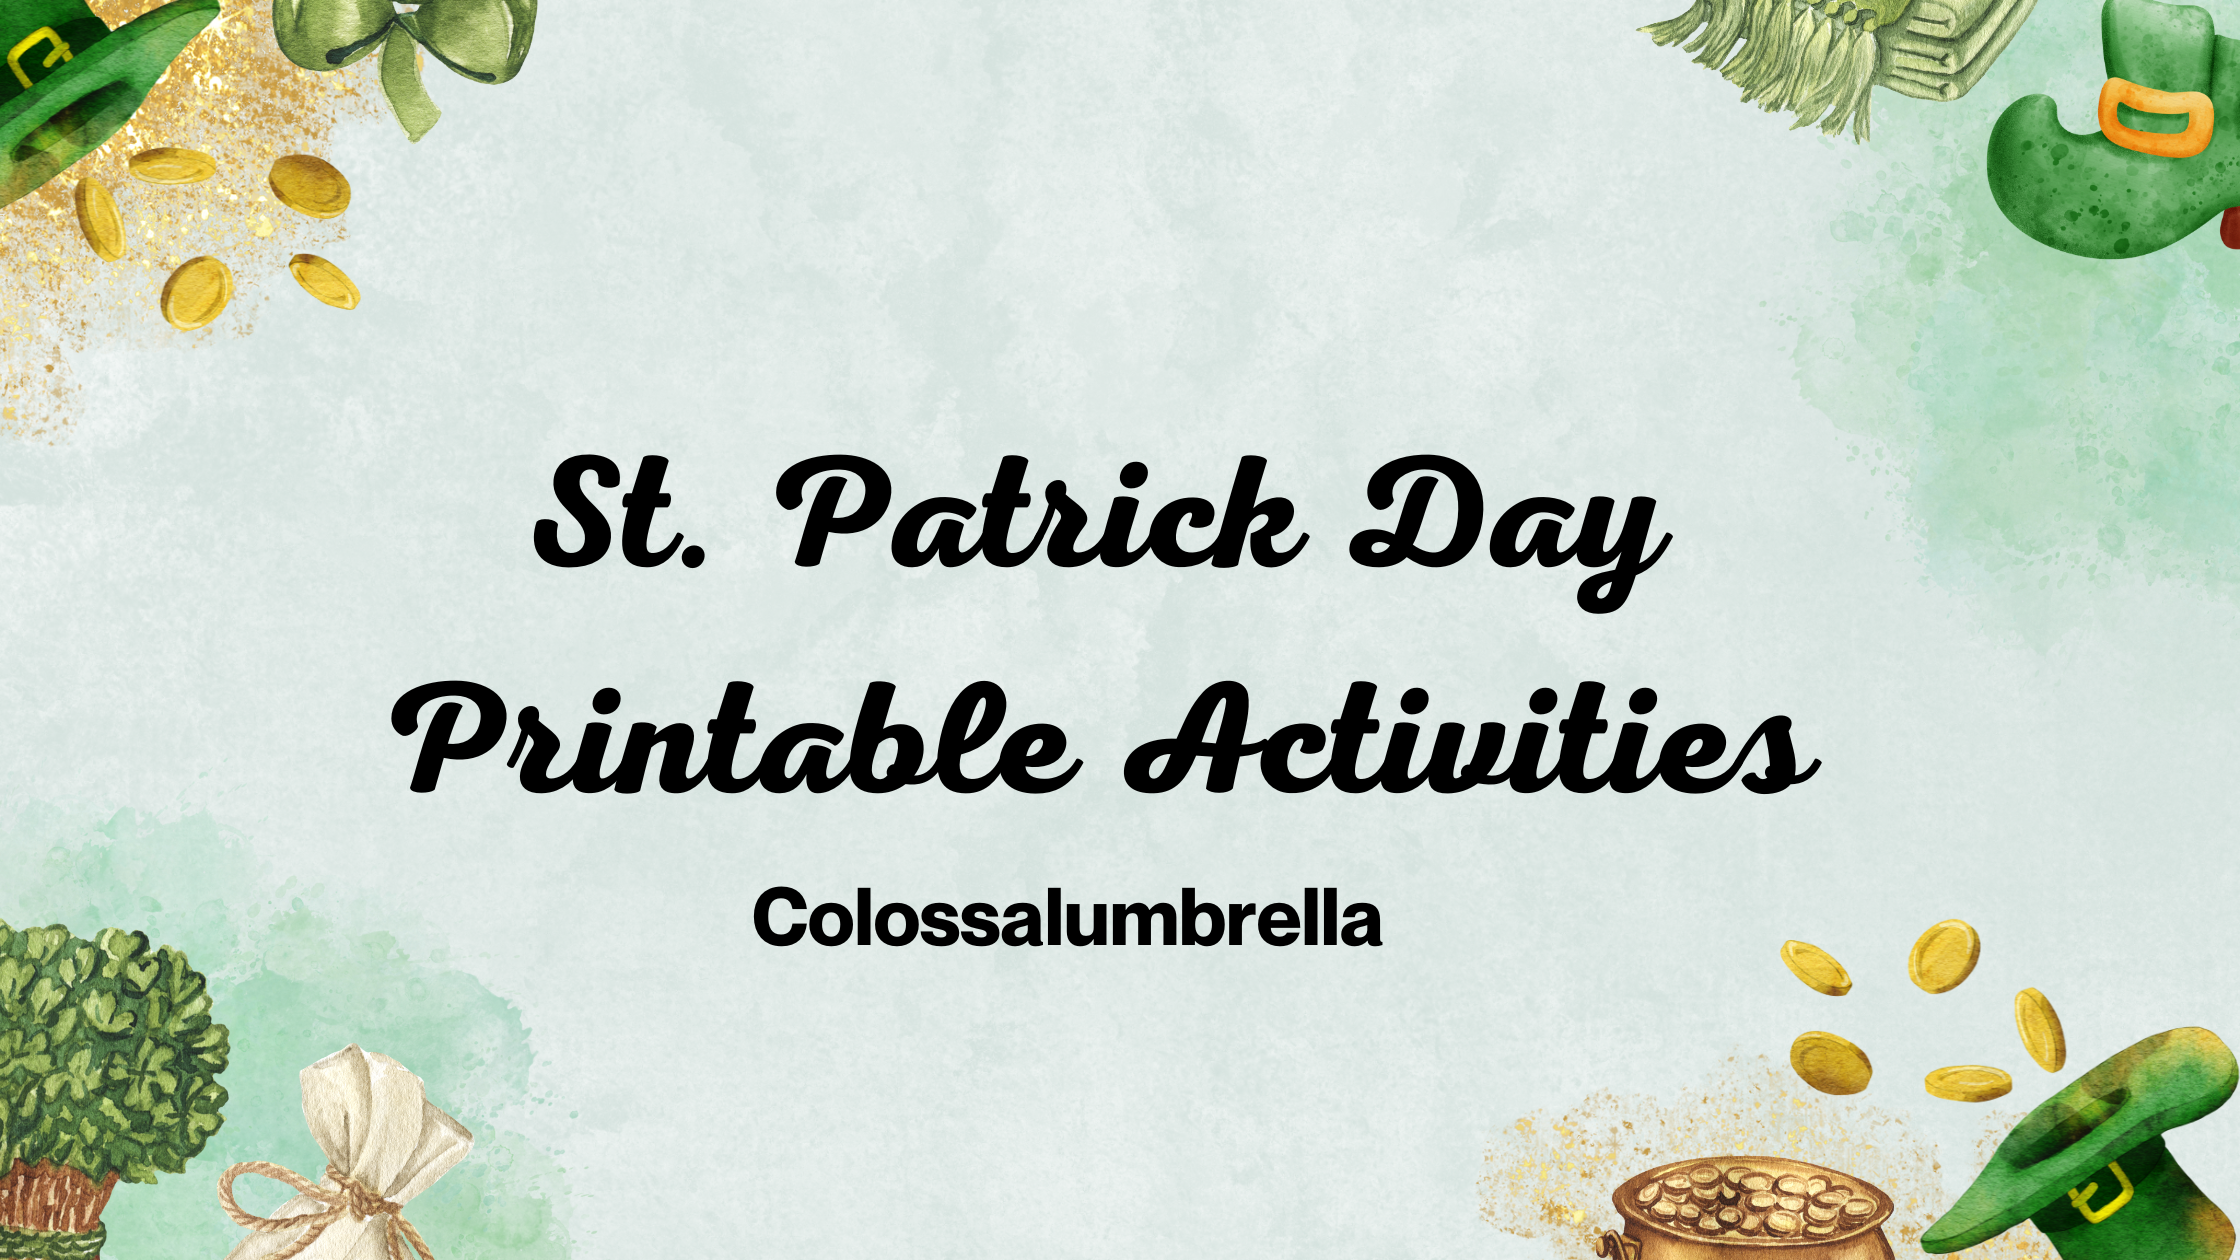 Amazing St. Patrick Day Printable Activities for all